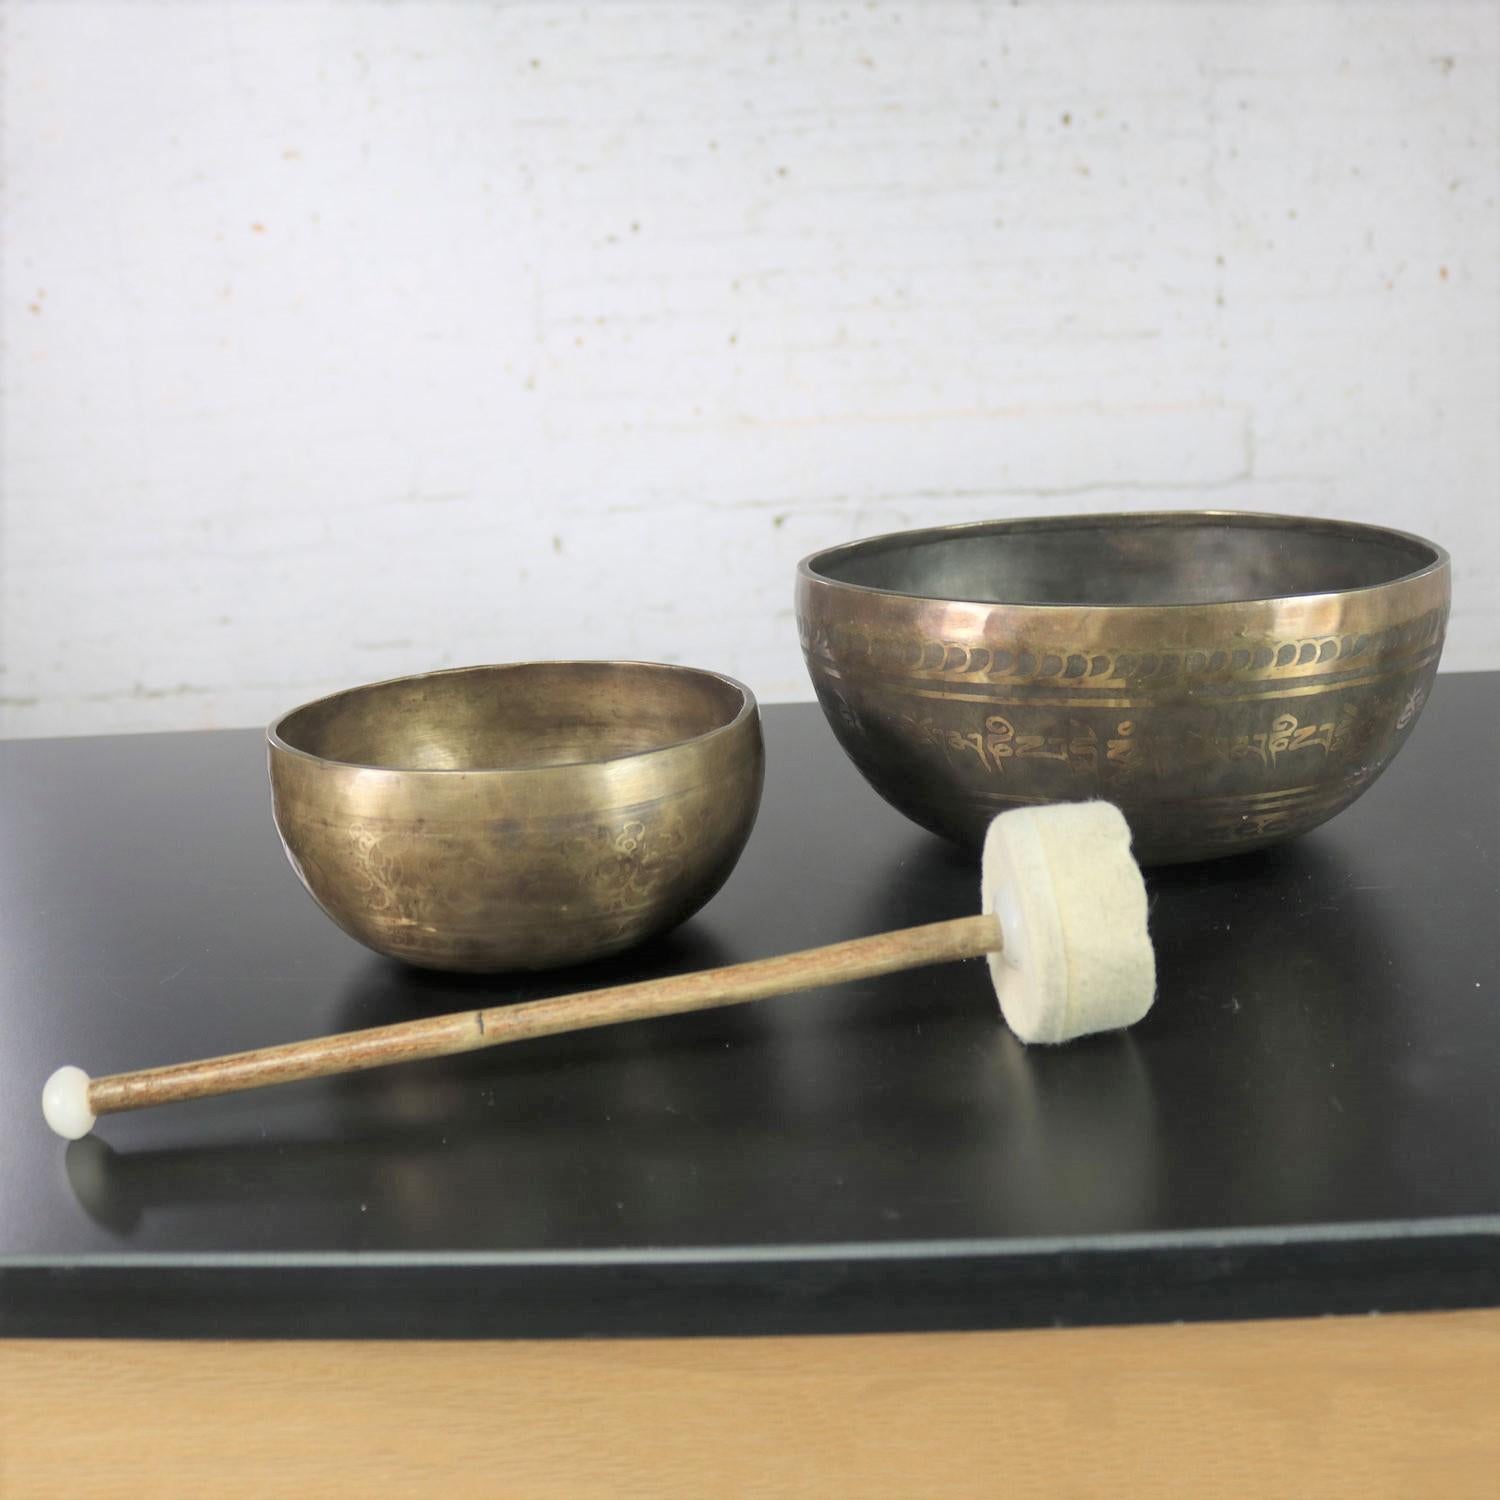 Handsome set of 2 nesting singing bowls or standing bowls a mallet for playing. Handmade of bronze or bell metal having an incised design on each bowl. They are in wonderful vintage condition and have awesome patina. Please see photos, circa 20th